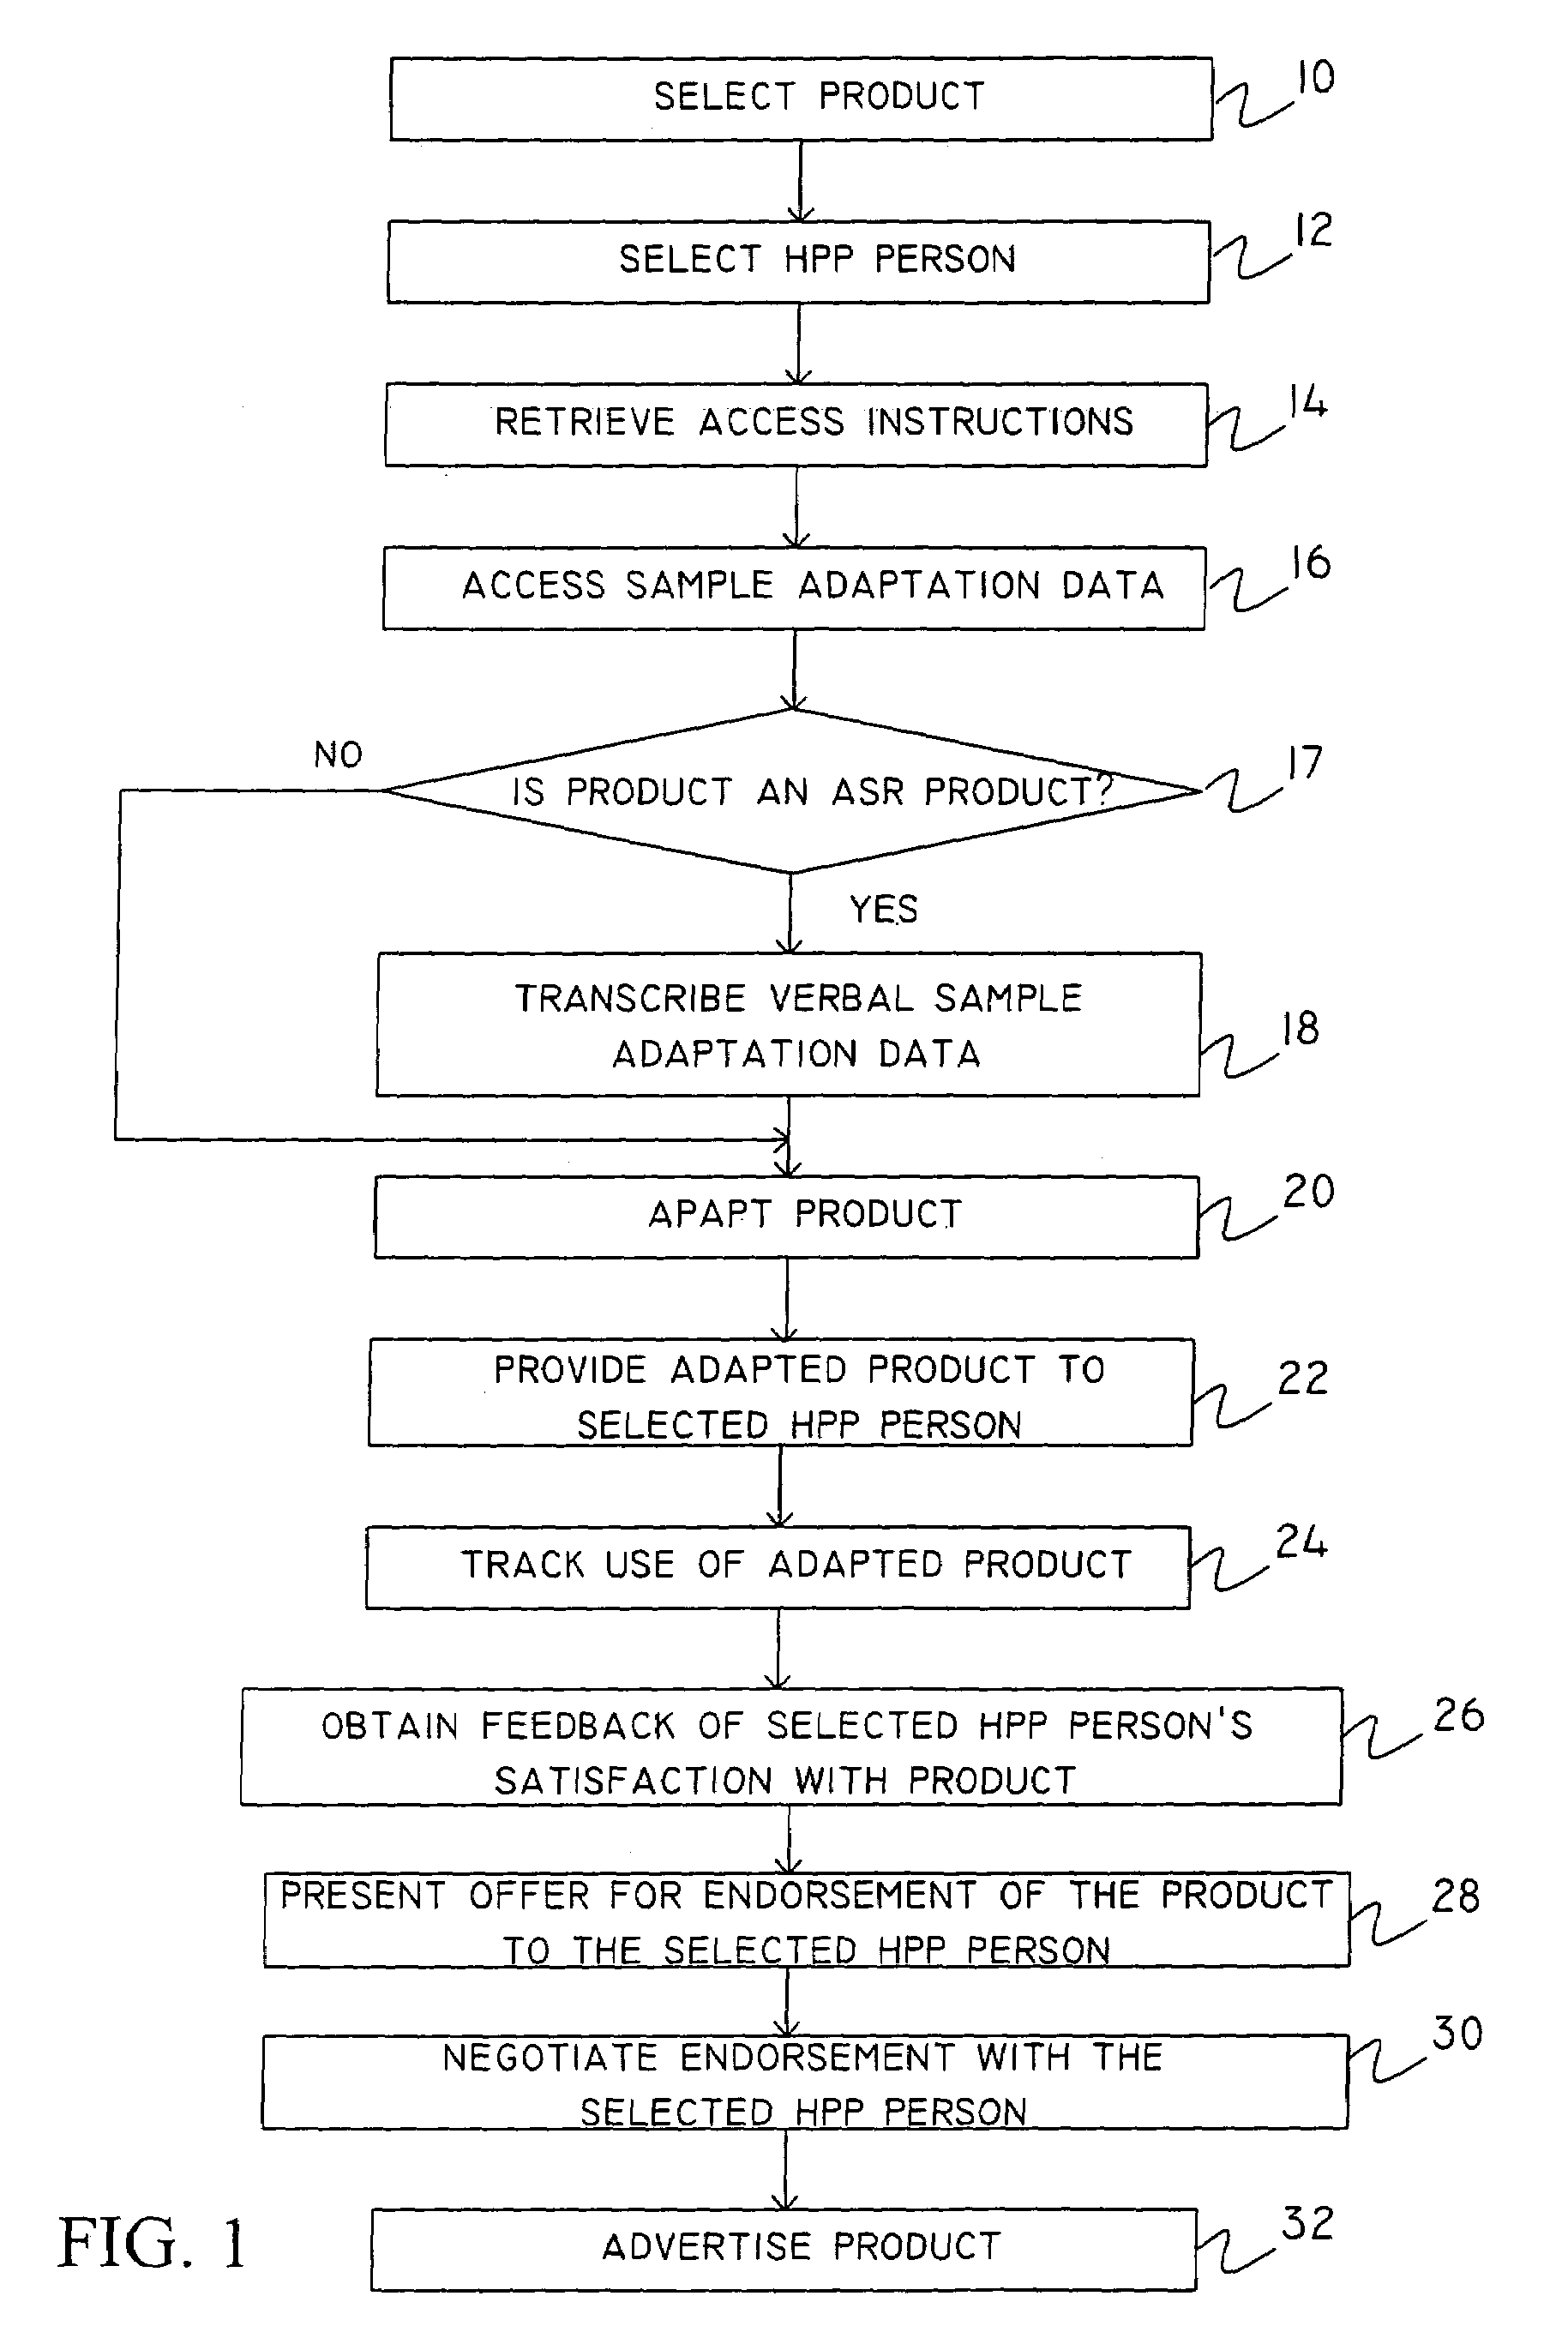 System and method for promoting the use of a selected software product having an adaptation module